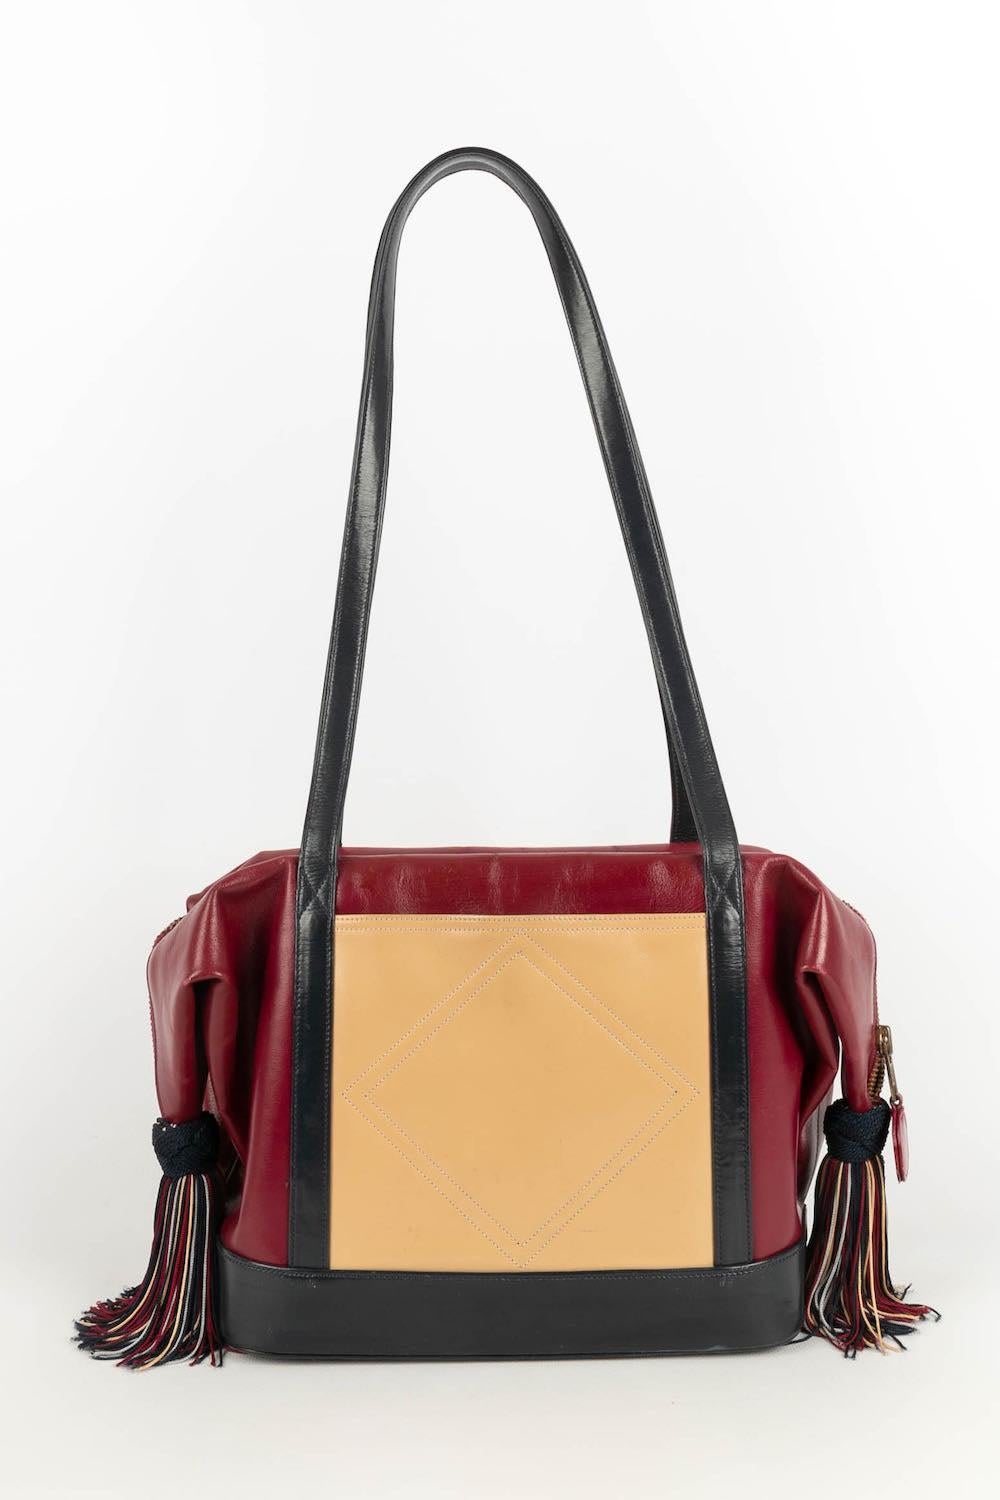 Renaud Pellegrino Multicolored Leather Bag with Golden Metal In Excellent Condition For Sale In SAINT-OUEN-SUR-SEINE, FR